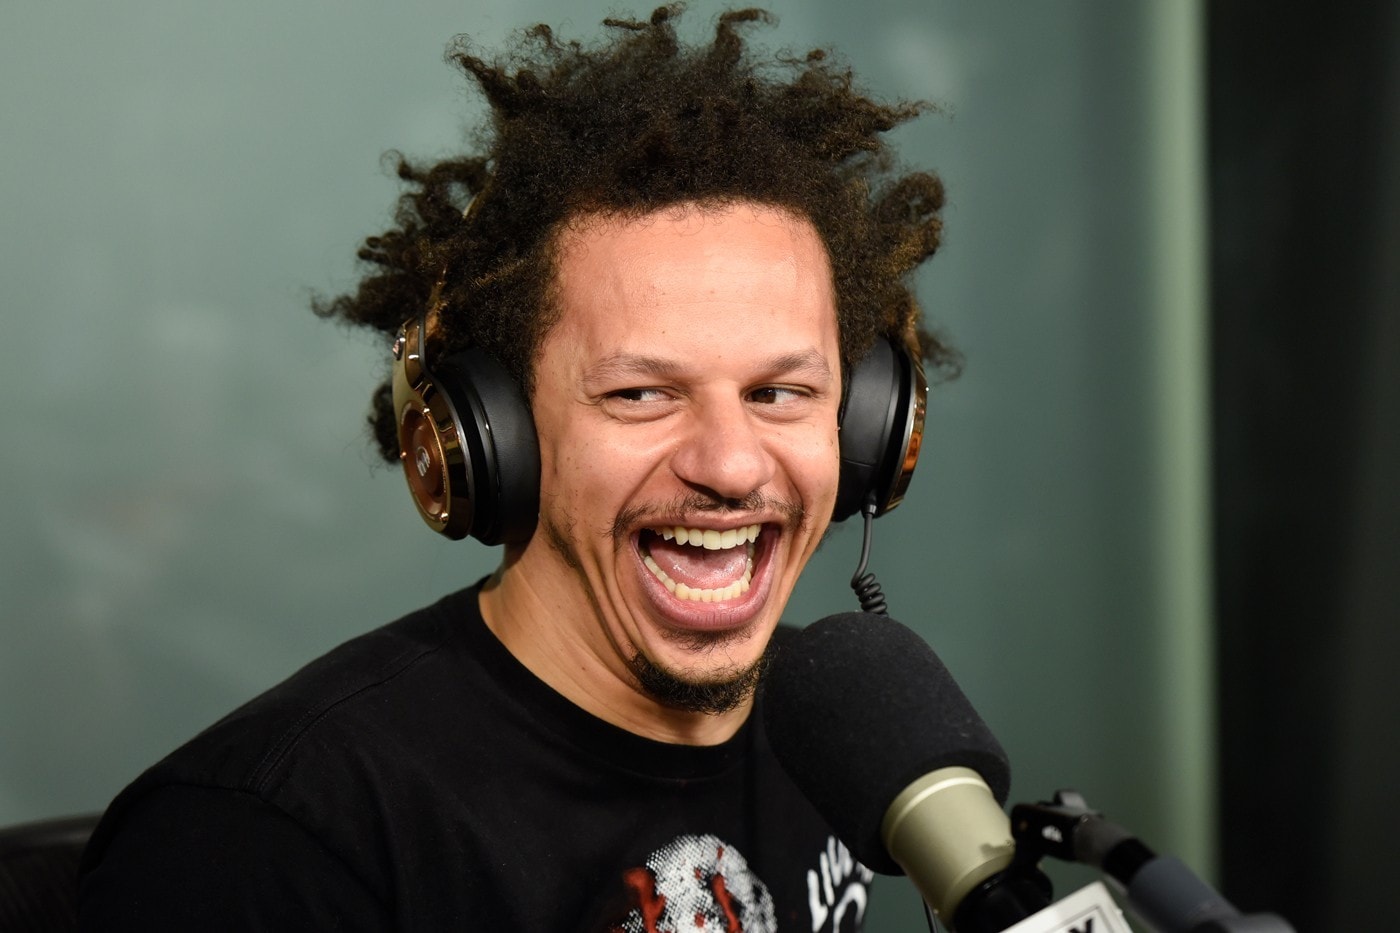 The Eric Andre Show Season 5 Music Guest Announced Anderson Paak Grimes Toro Y Moi Lil Yachty Joey Badass Joey Bada$$ Adult Swim HYPEBEAST Music News Updates Television TV Shows Comedy Sketch Comedian Hannibal Buress